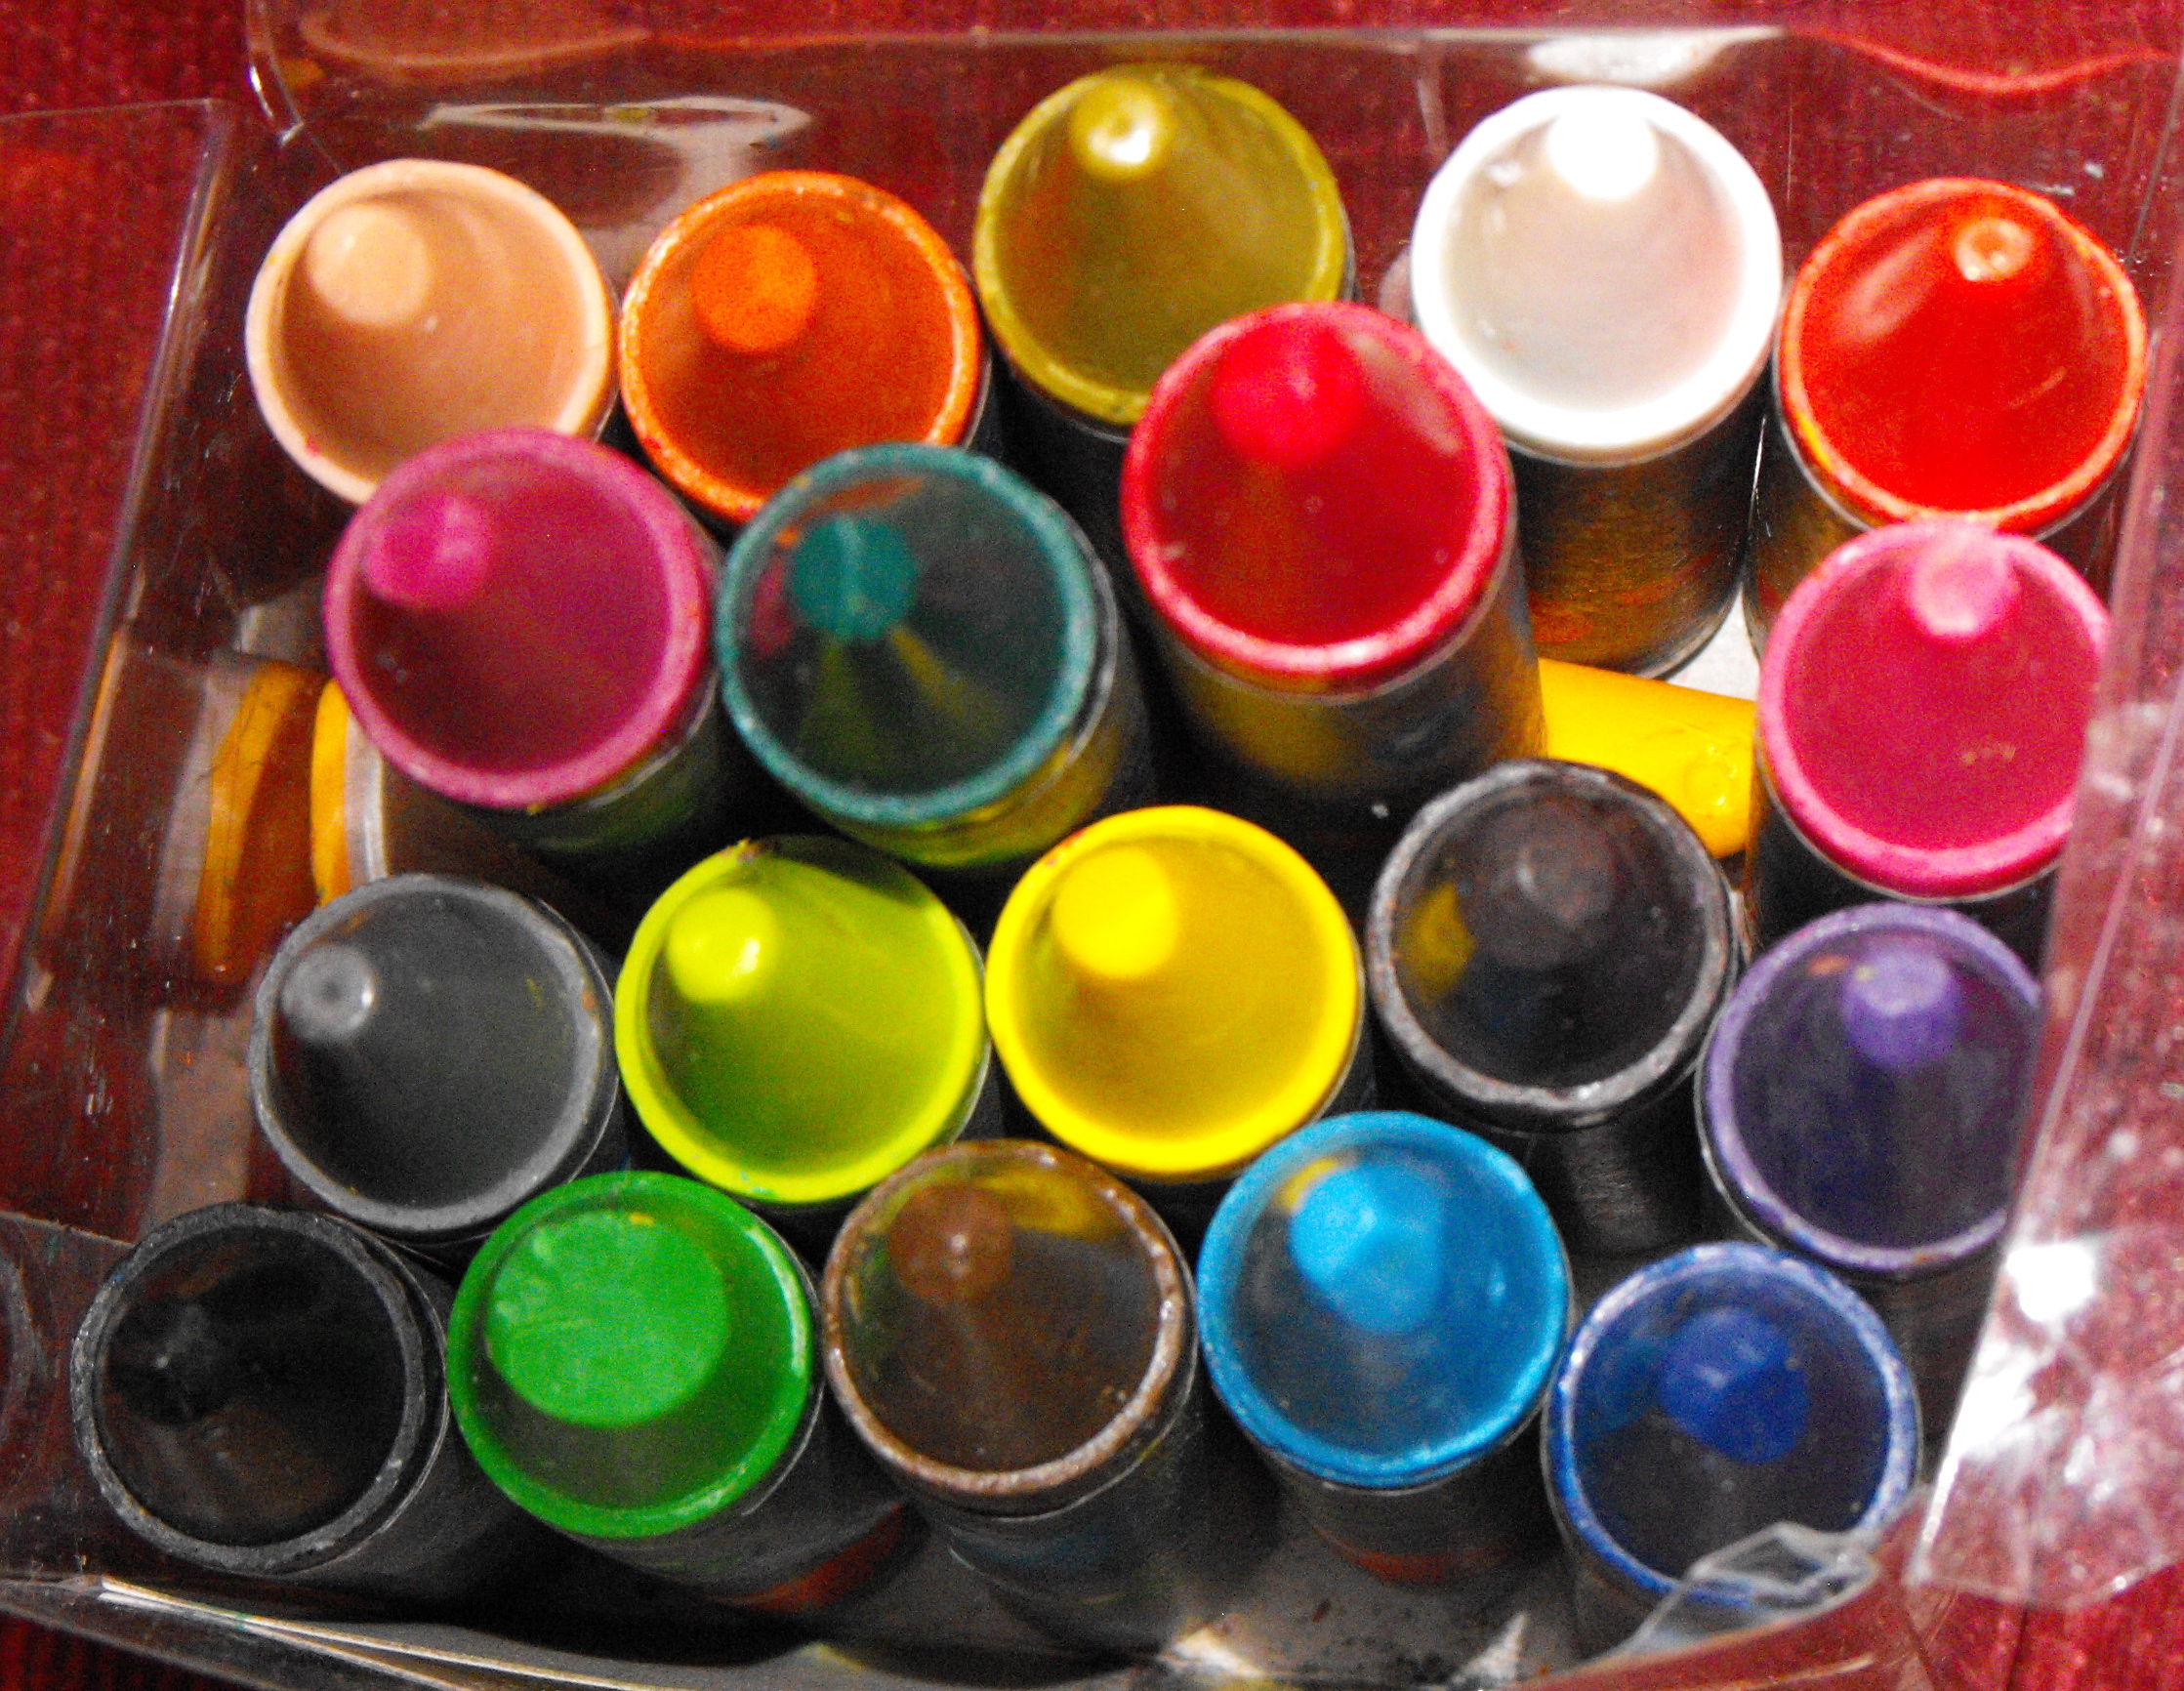 Creative counselling: Crayons for counselling!